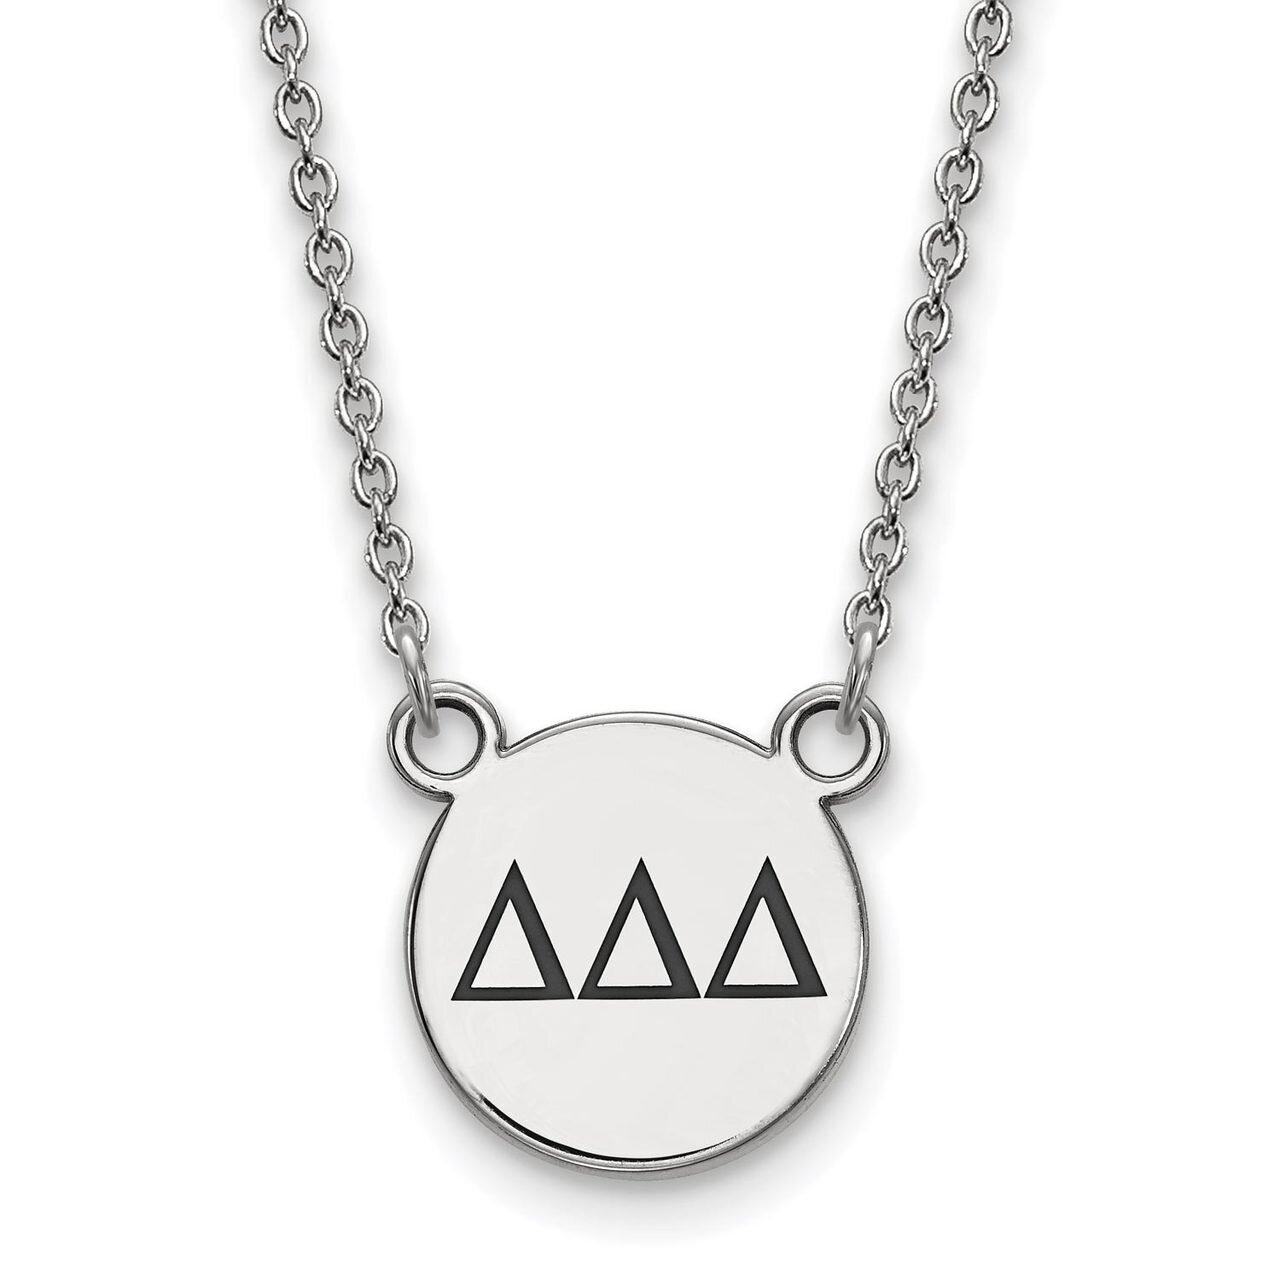 Delta Delta Delta Extra Small Enameled Pendant with 18 Inch Chain Sterling Silver SS016DDD-18